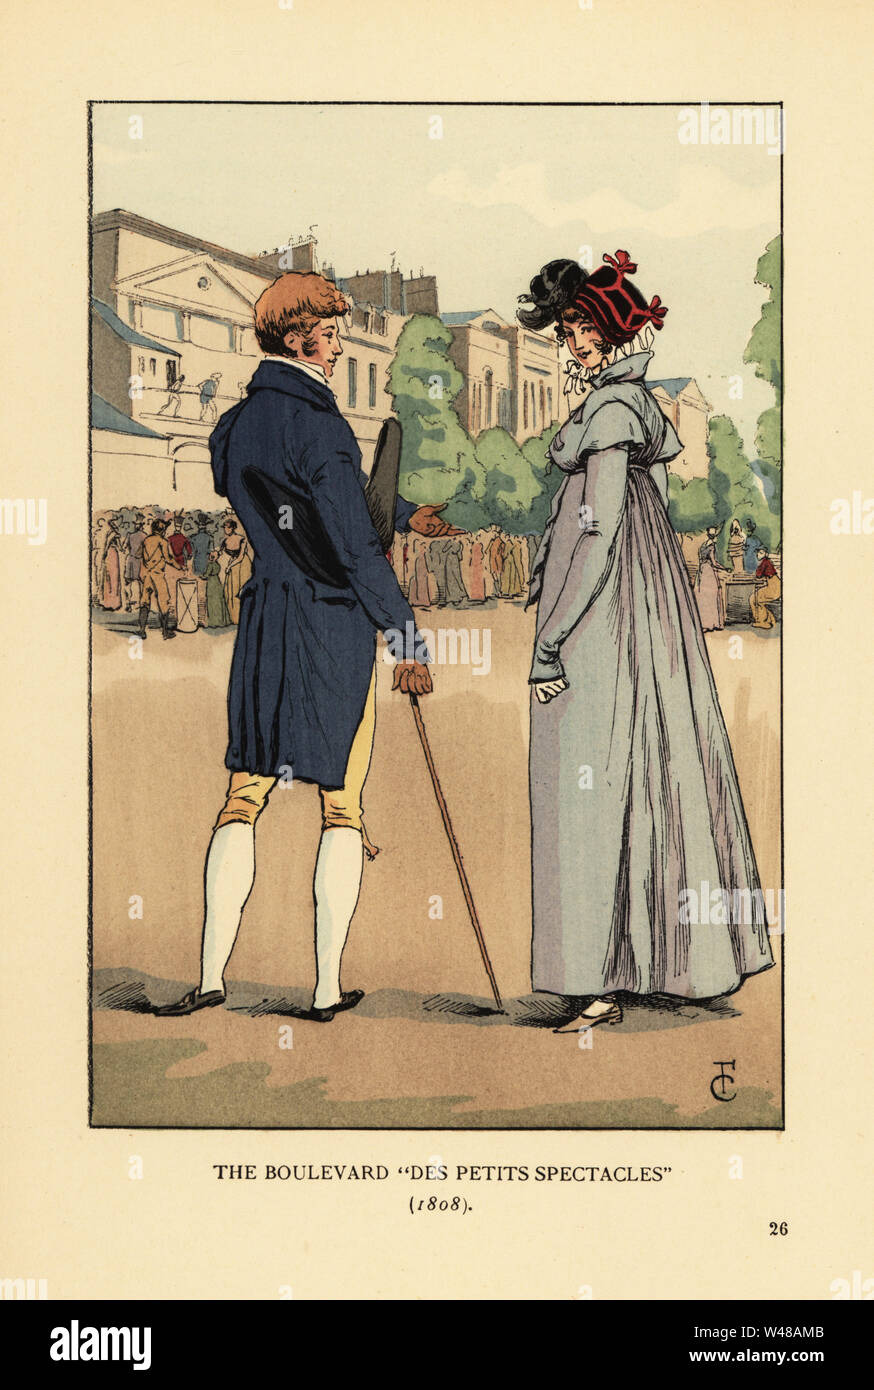 Fashionable couple slumming it on the Boulevard du Temple, Paris. The Boulevard des Petits Spectacles, 1808. In the background, crowds mill around in front of the many small theatres on the street. Handcoloured lithograph by R.V. after an illustration by Francois Courboin from Octave Uzanne’s Fashion in Paris, William Heinemann, London, 1898. Stock Photo